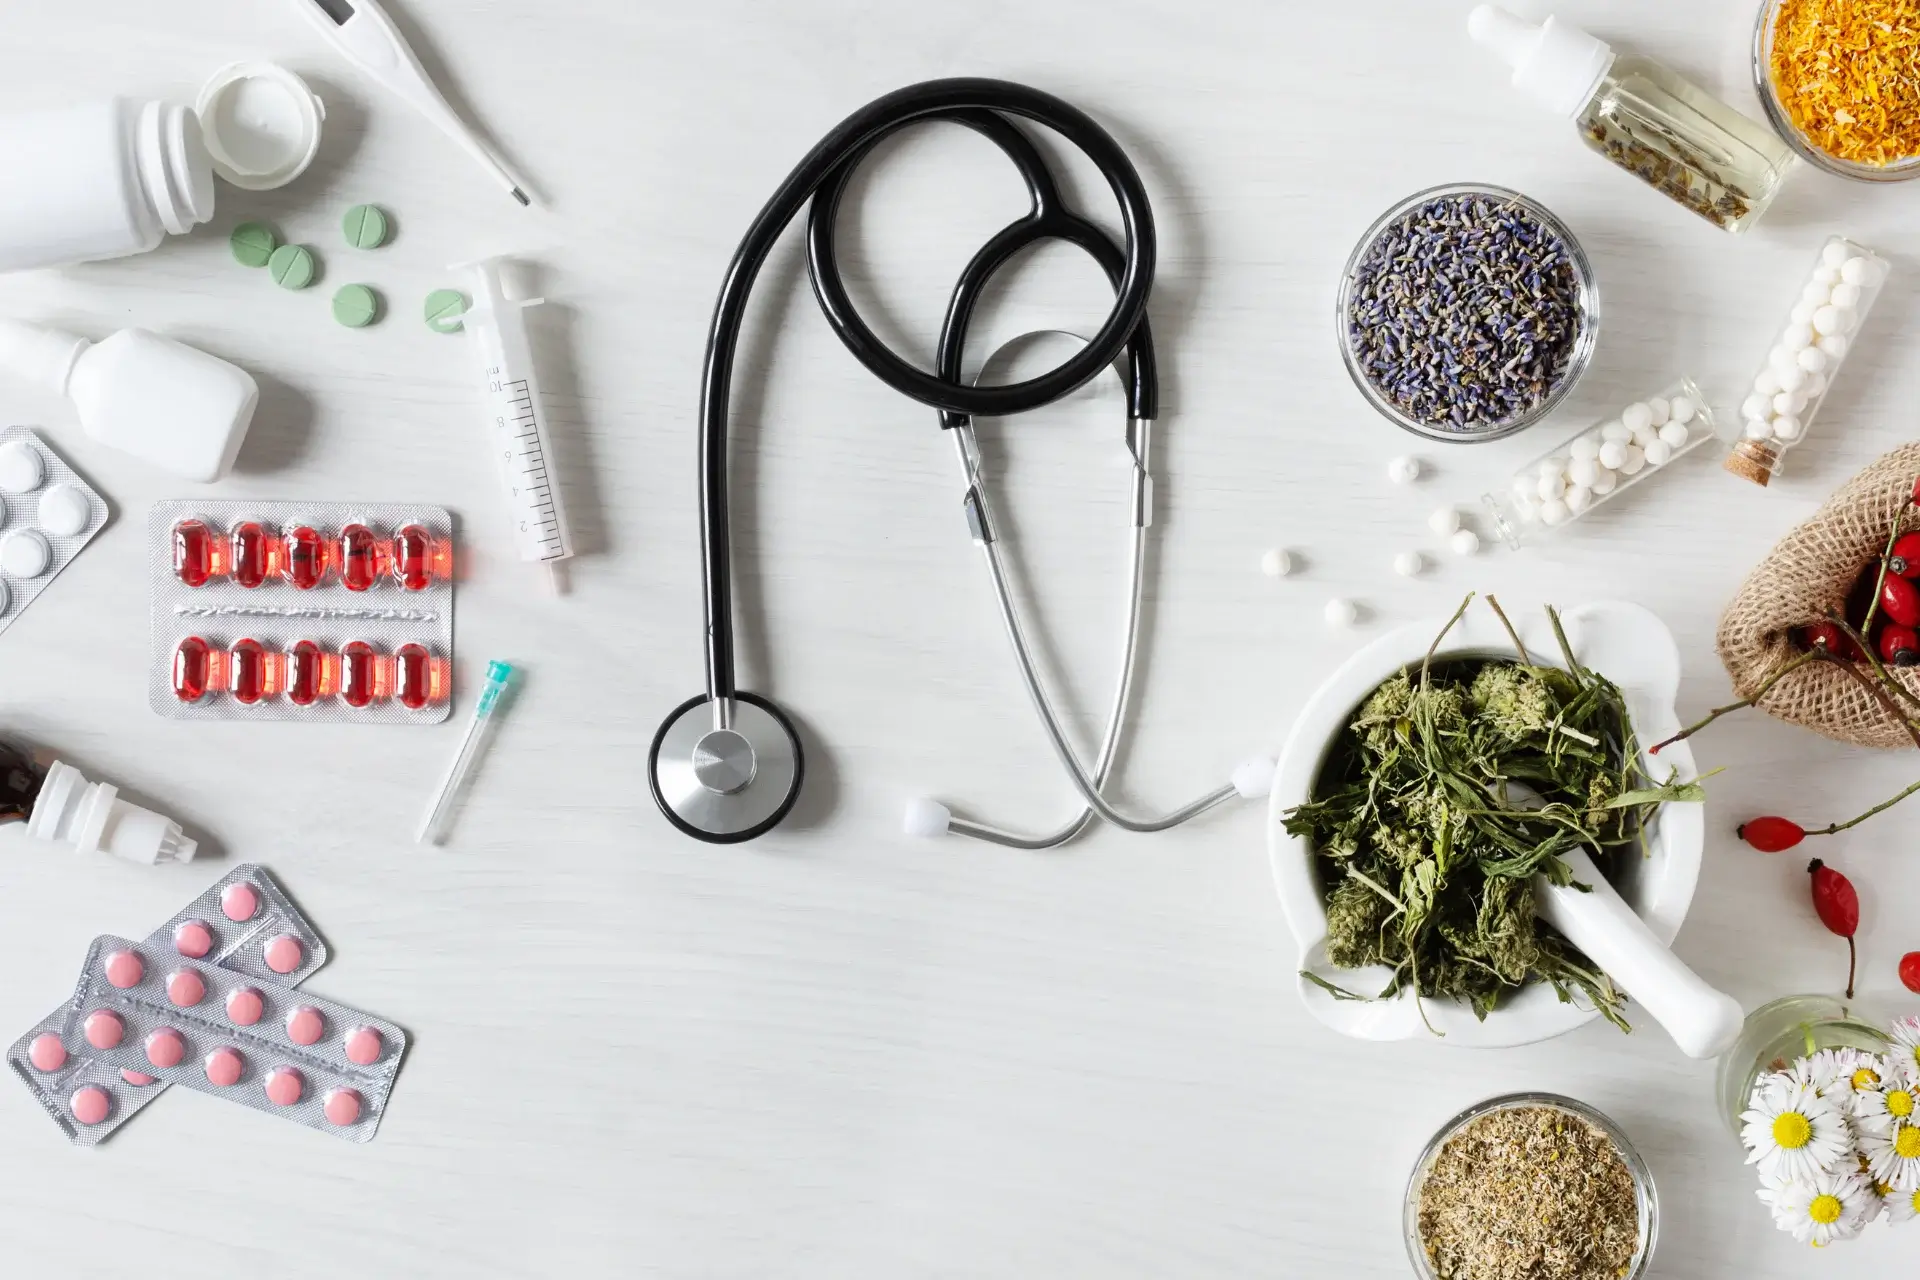 A stethoscope and some pills on top of the table.